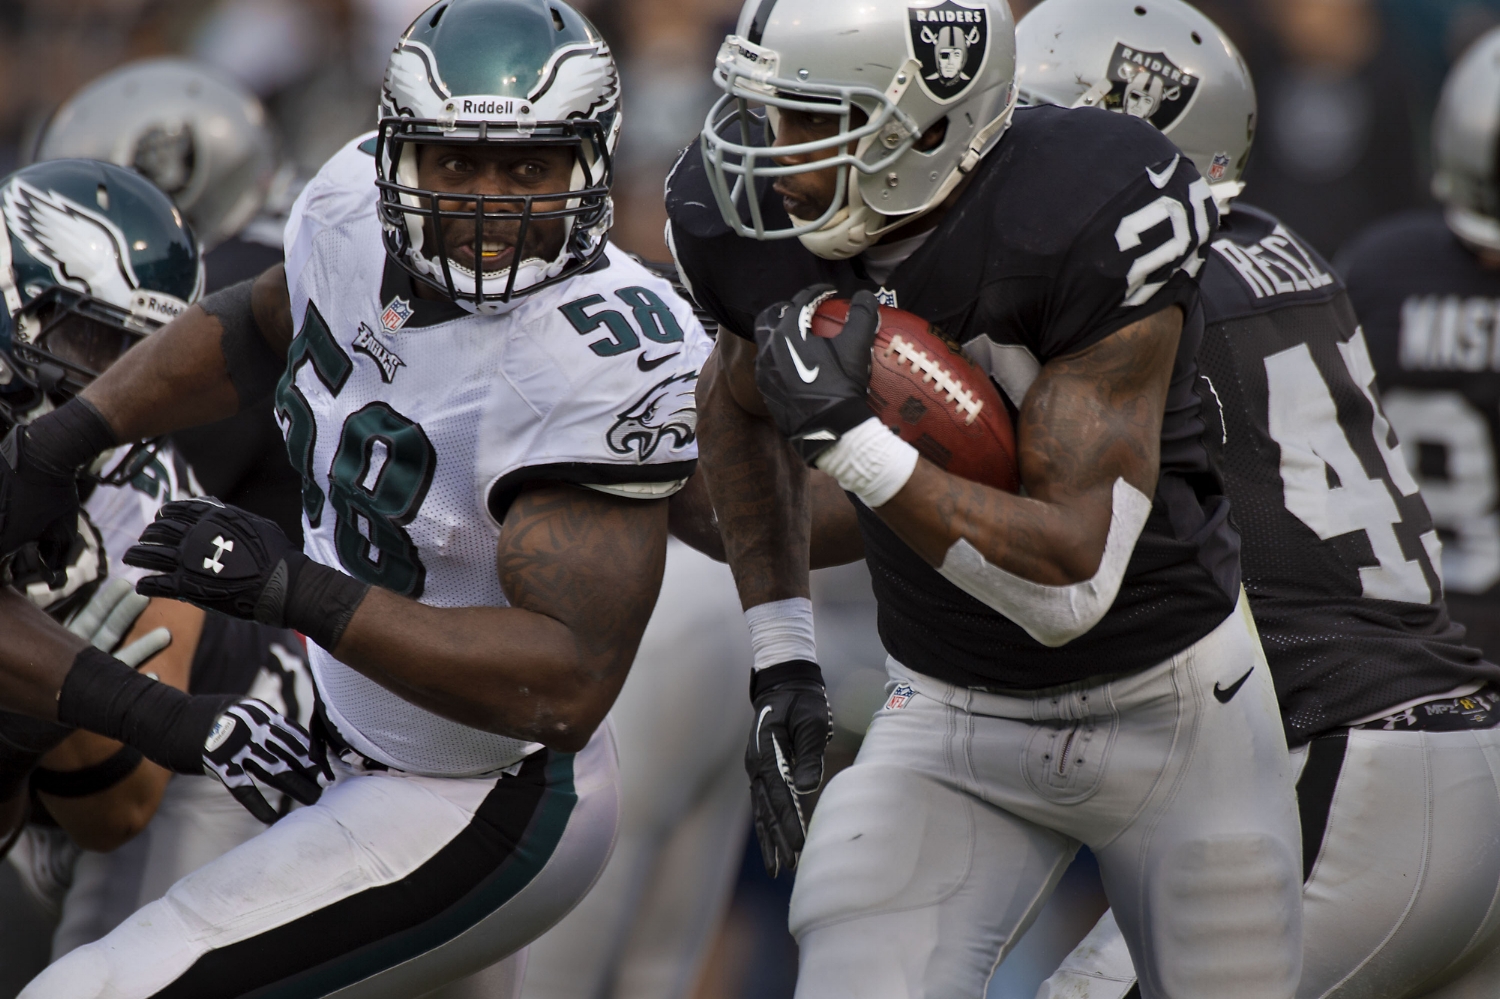  Raiders running back Darren McFadden (20) runs past Eagles outside linebacker Trent Cole (58) during the game between the Oakland Raiders and the Philadelphia Eagles at O.co Coliseum in Oakland on Sunday, November 3, 2013. 